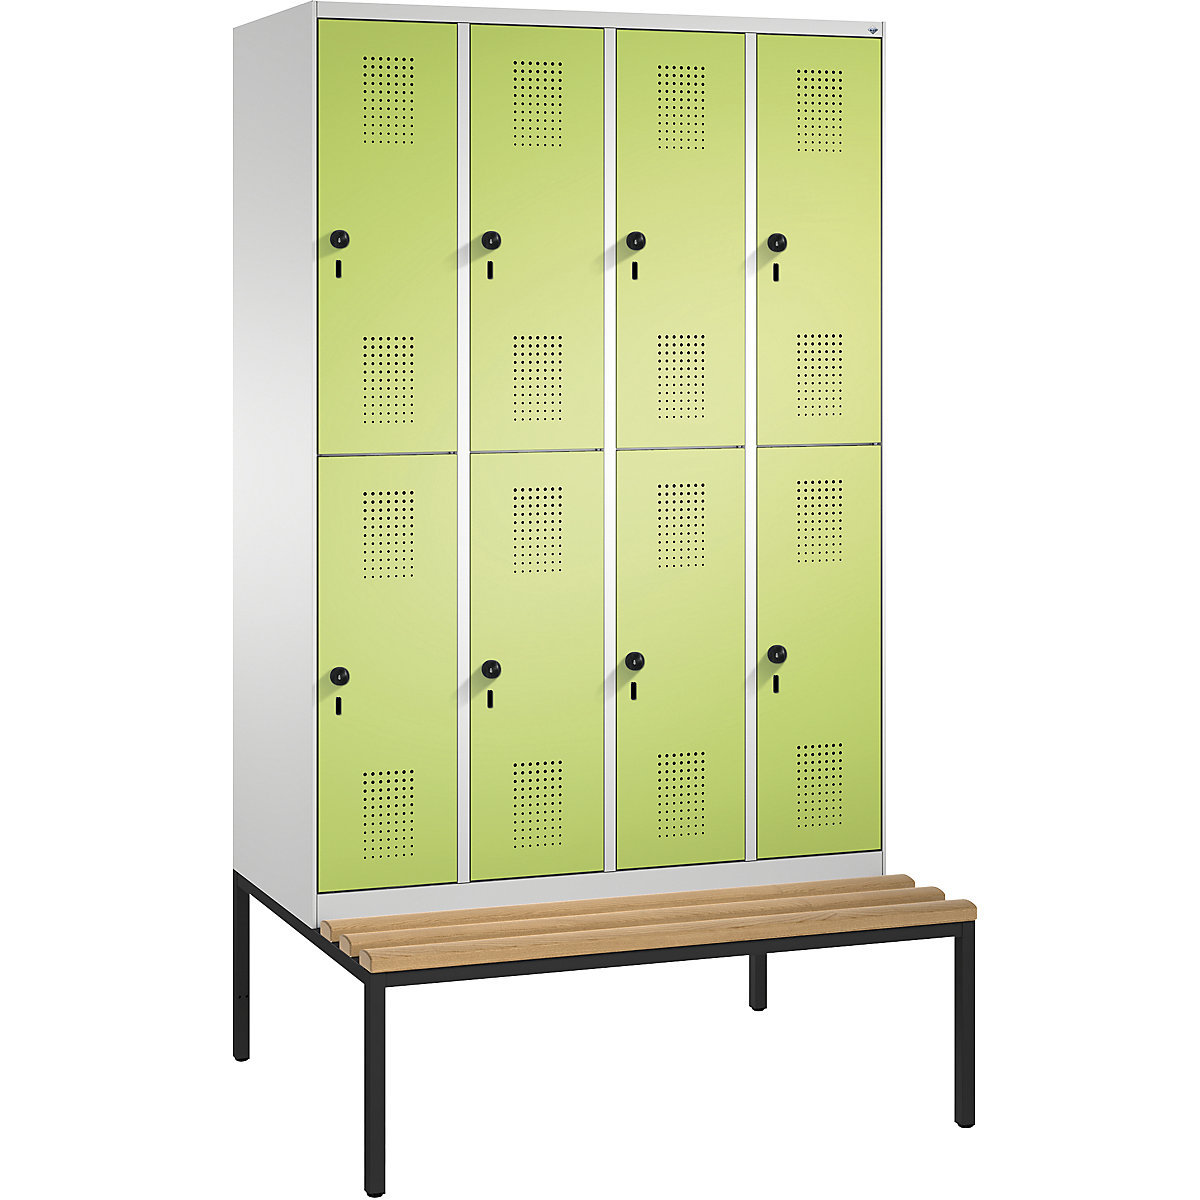 EVOLO cloakroom locker, double tier, with bench – C+P, 4 compartments, 2 shelf compartments each, compartment width 300 mm, light grey / viridian green-9